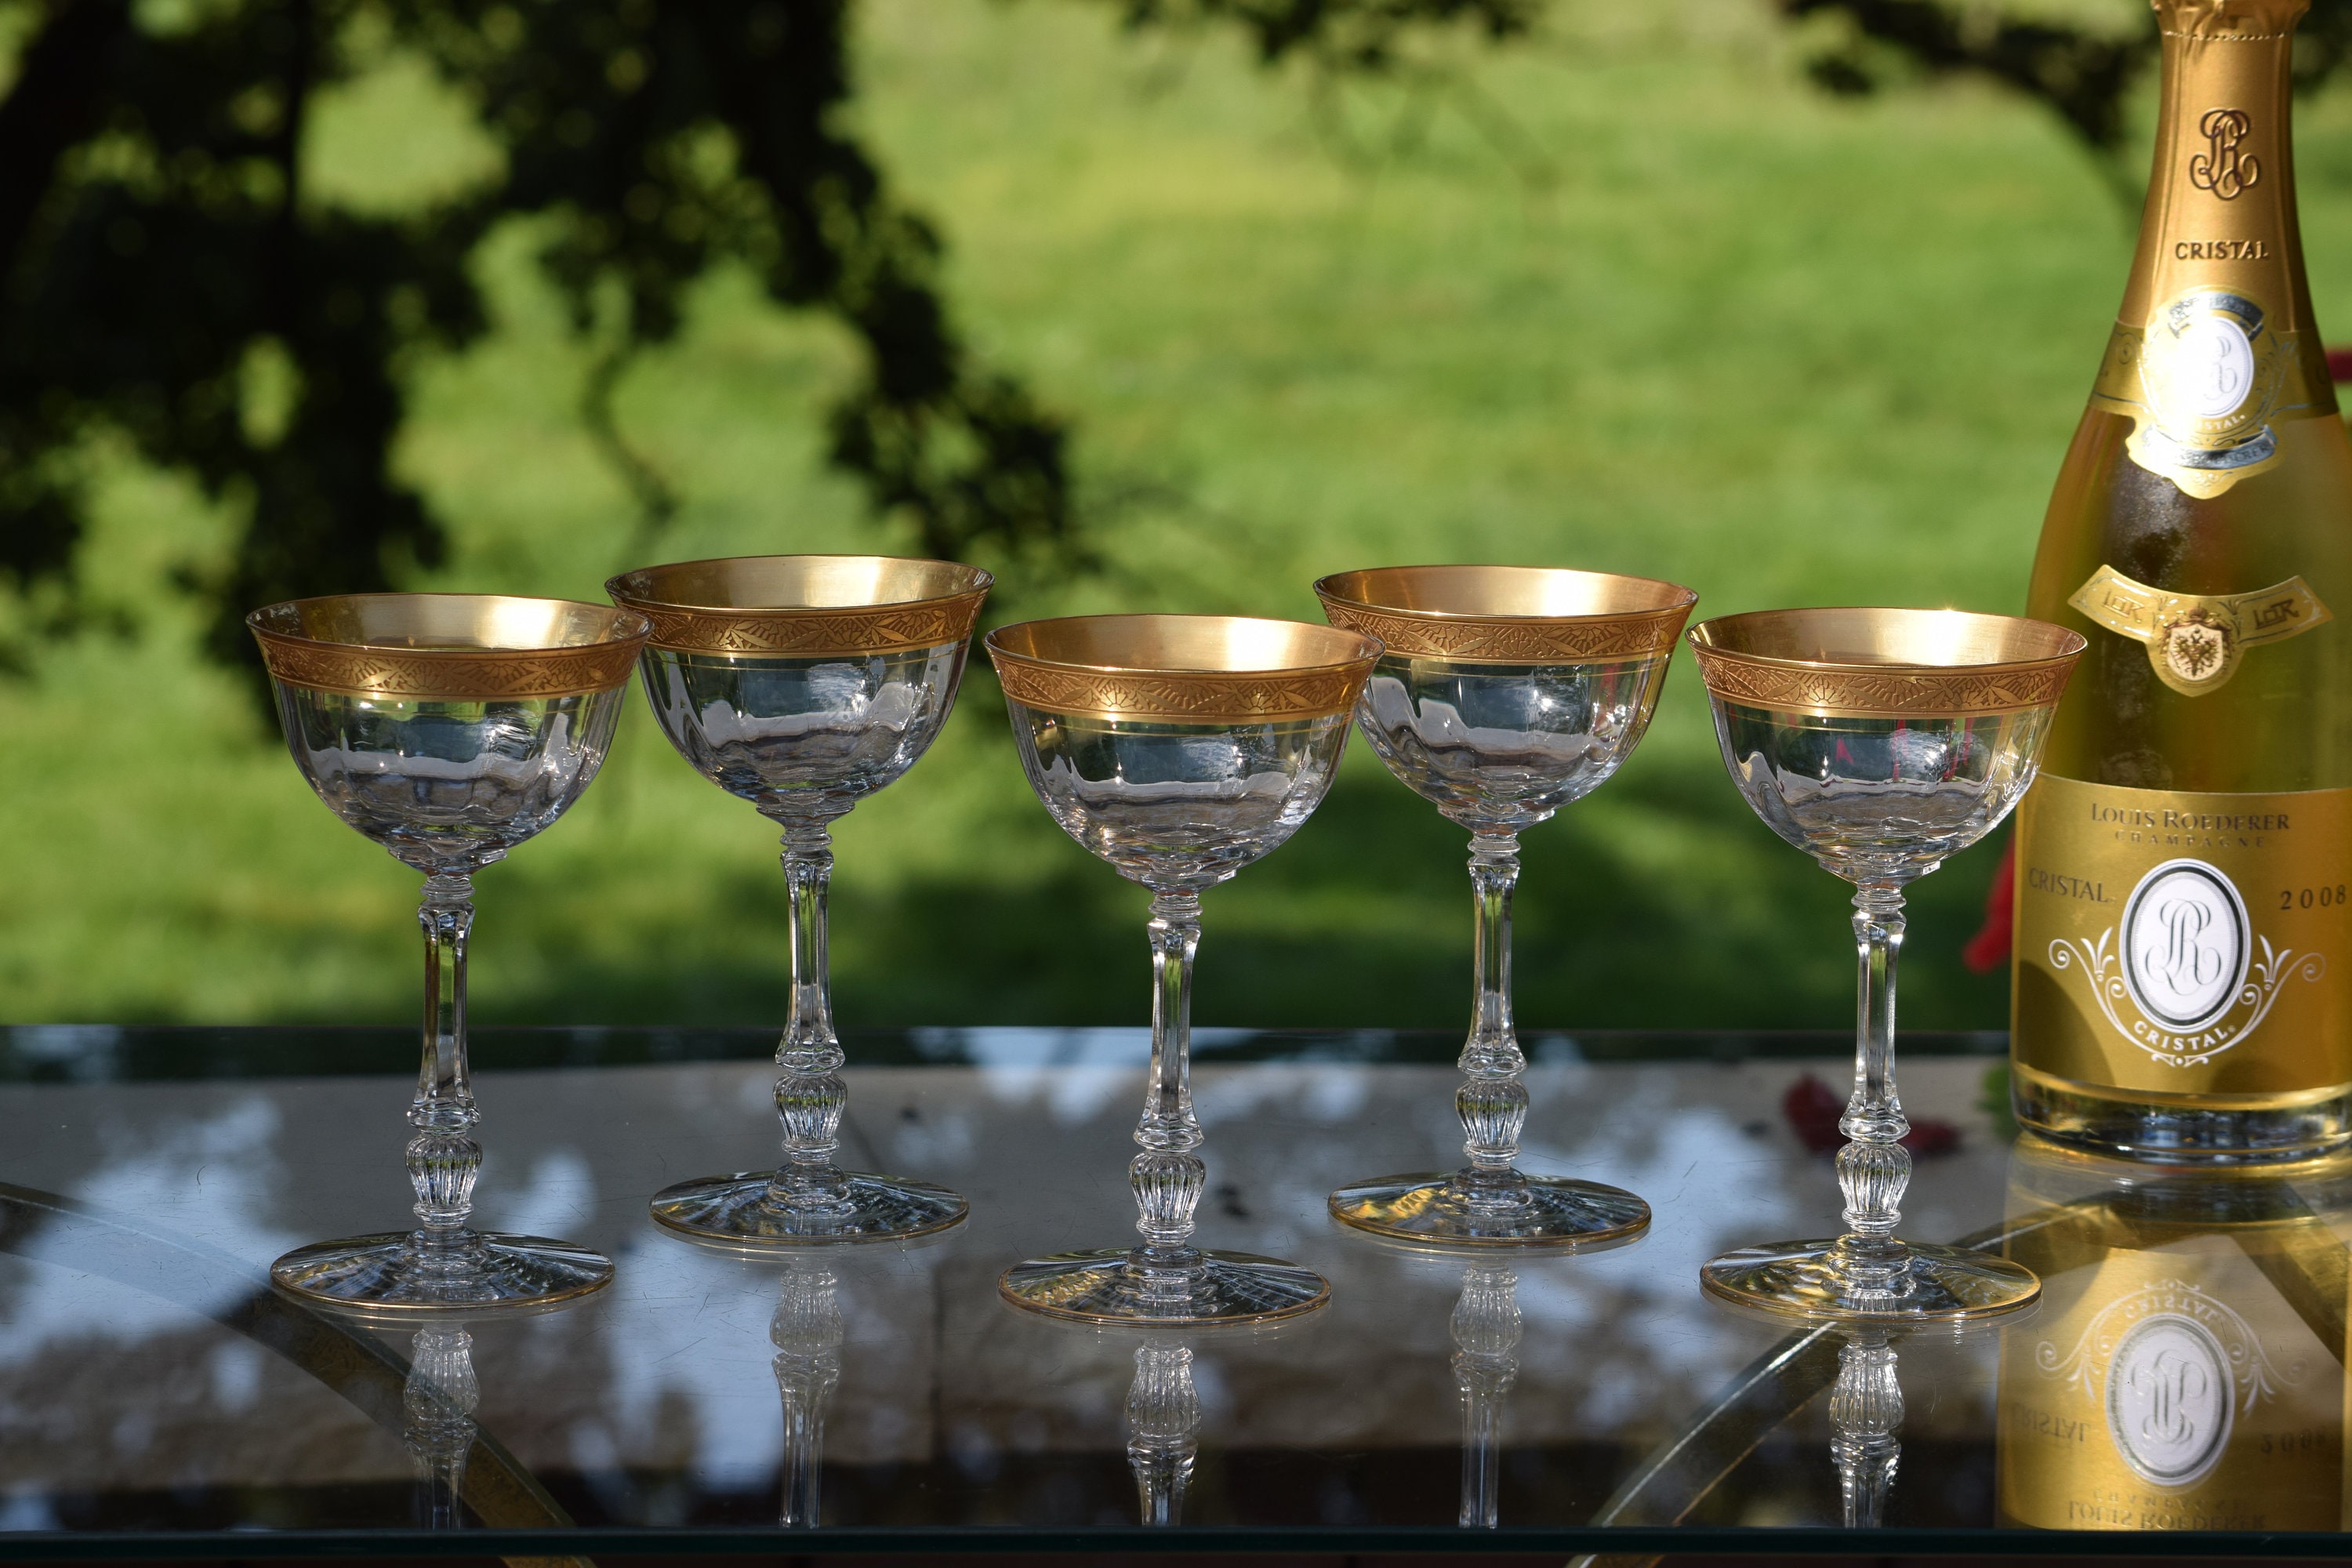 Luxury Stainless Steel Champagne Gold Wine Goblets With Engraving And  Creative Metal Martini Cup Goblet For Bars From Meanniceg, $17.52